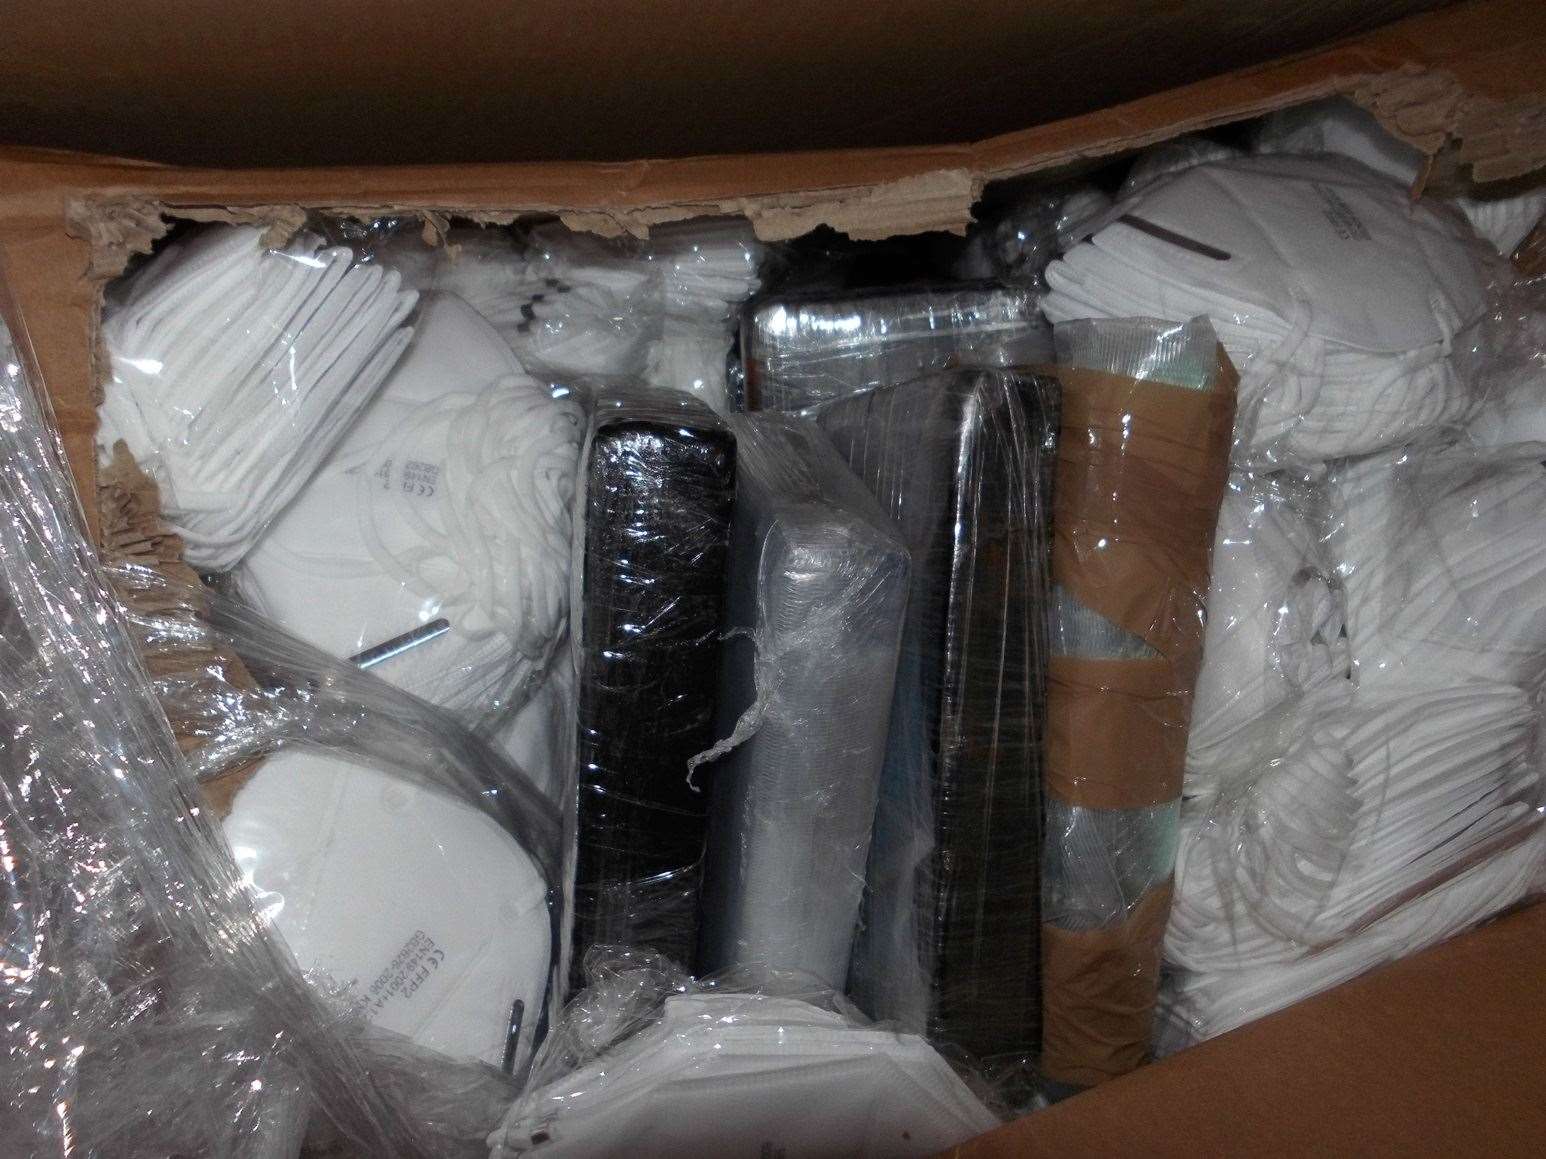 Approximately 14 kilos of cocaine was found hidden among the mask Picture: Border Force